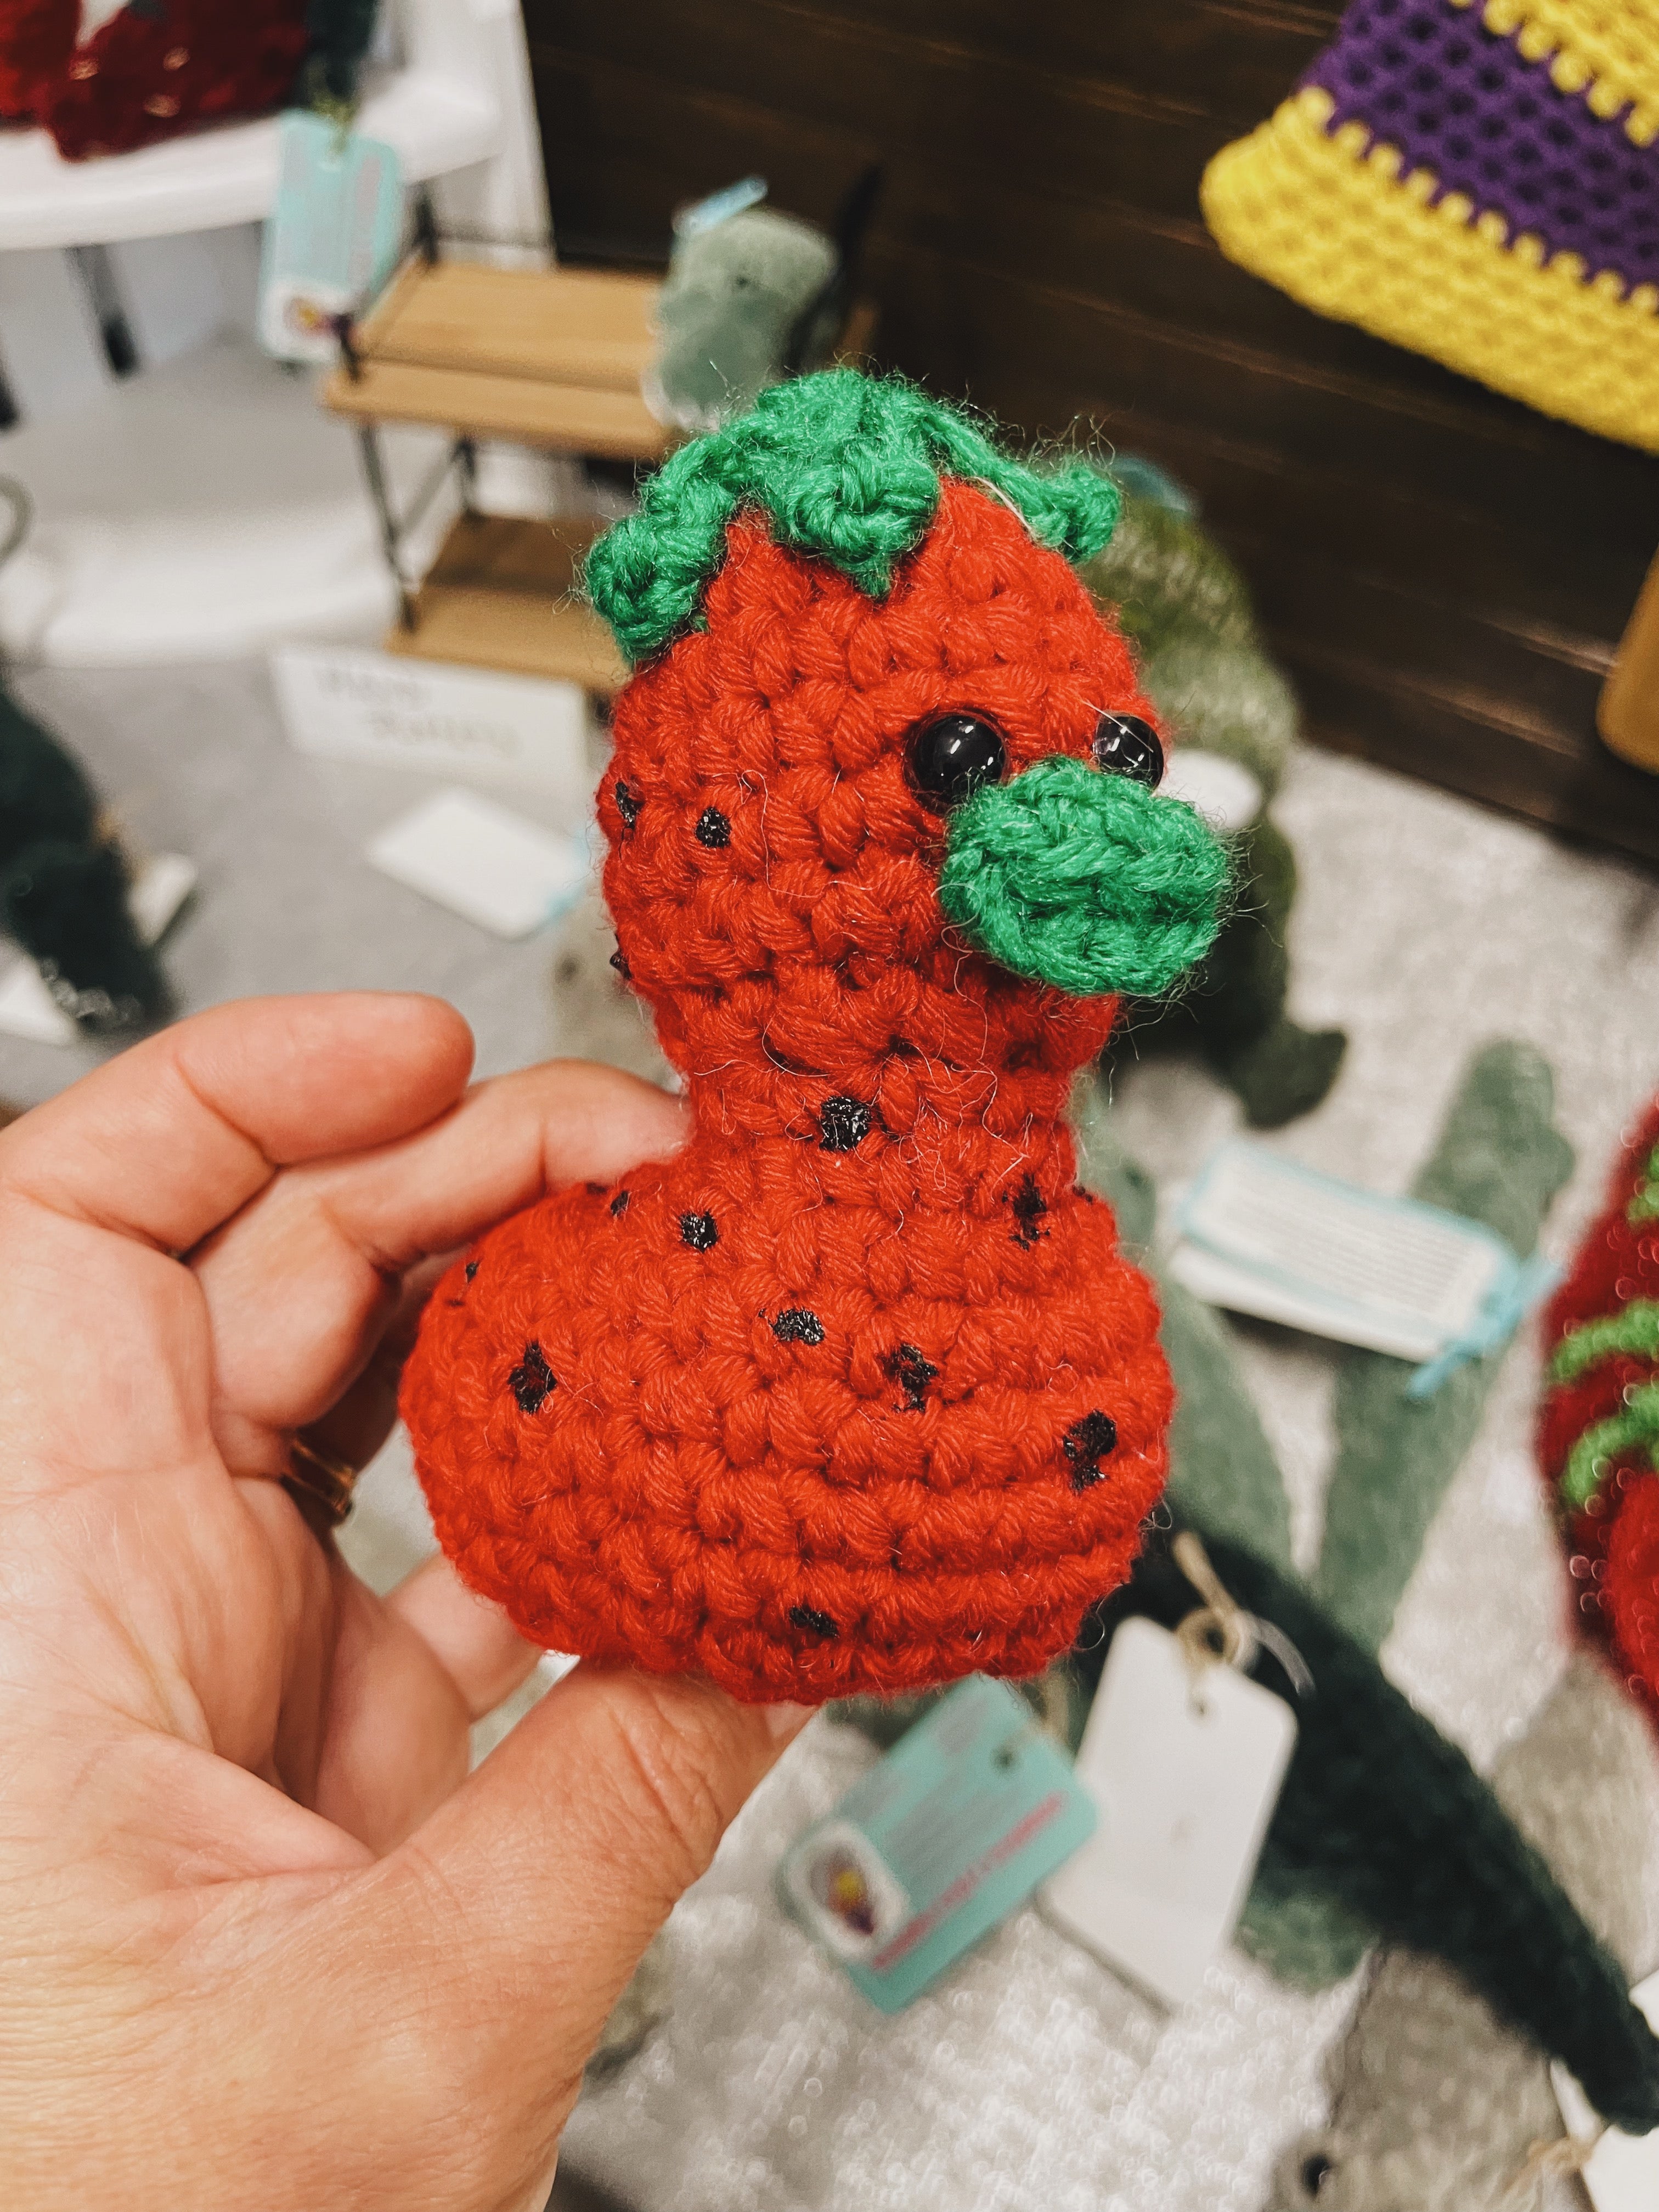 A Handmade Strawberry-Themed Duck Available for Sale at the Ponchatoula Country Market